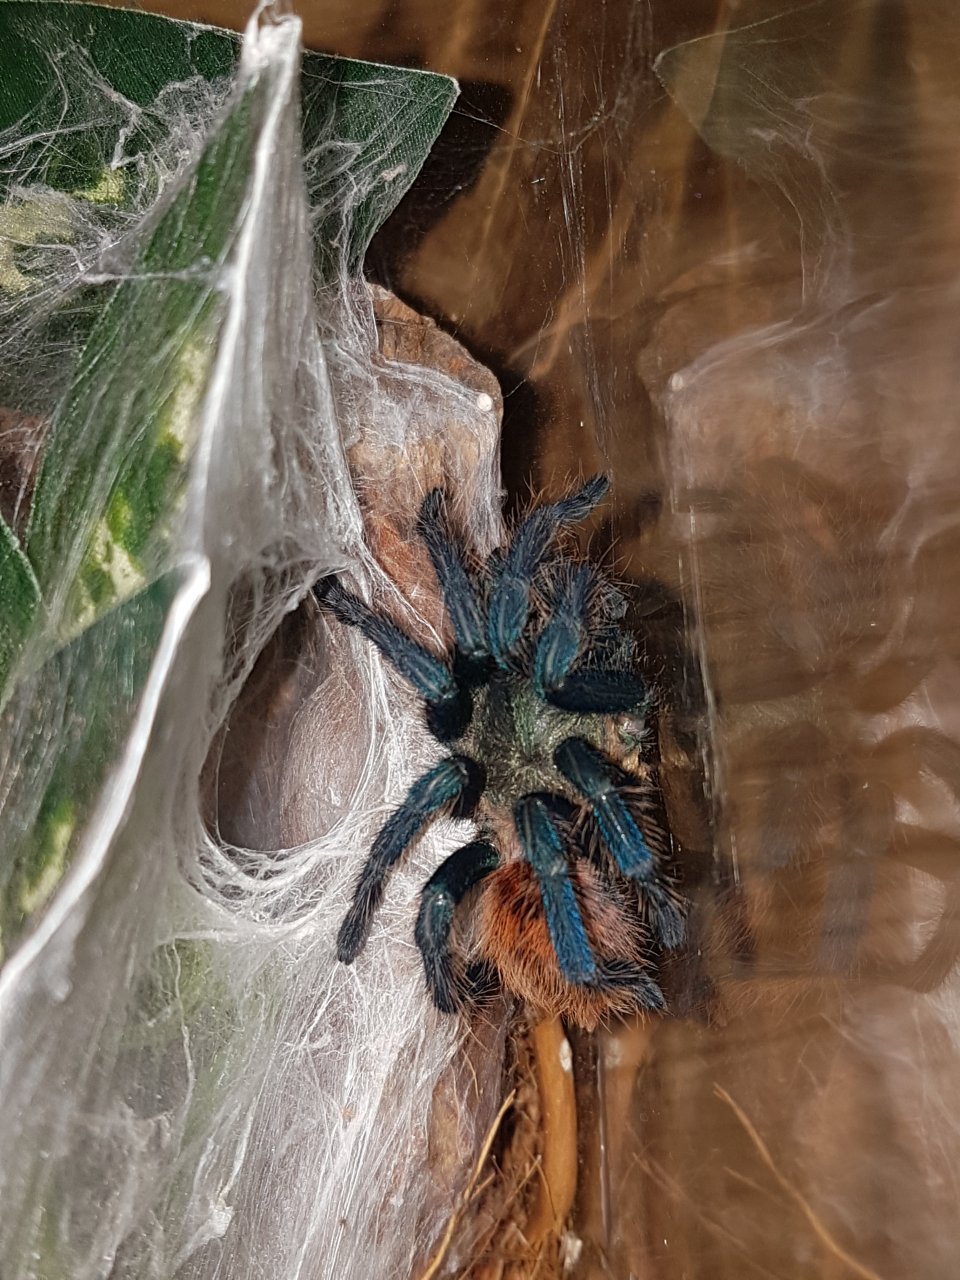 Freshly molted GBB